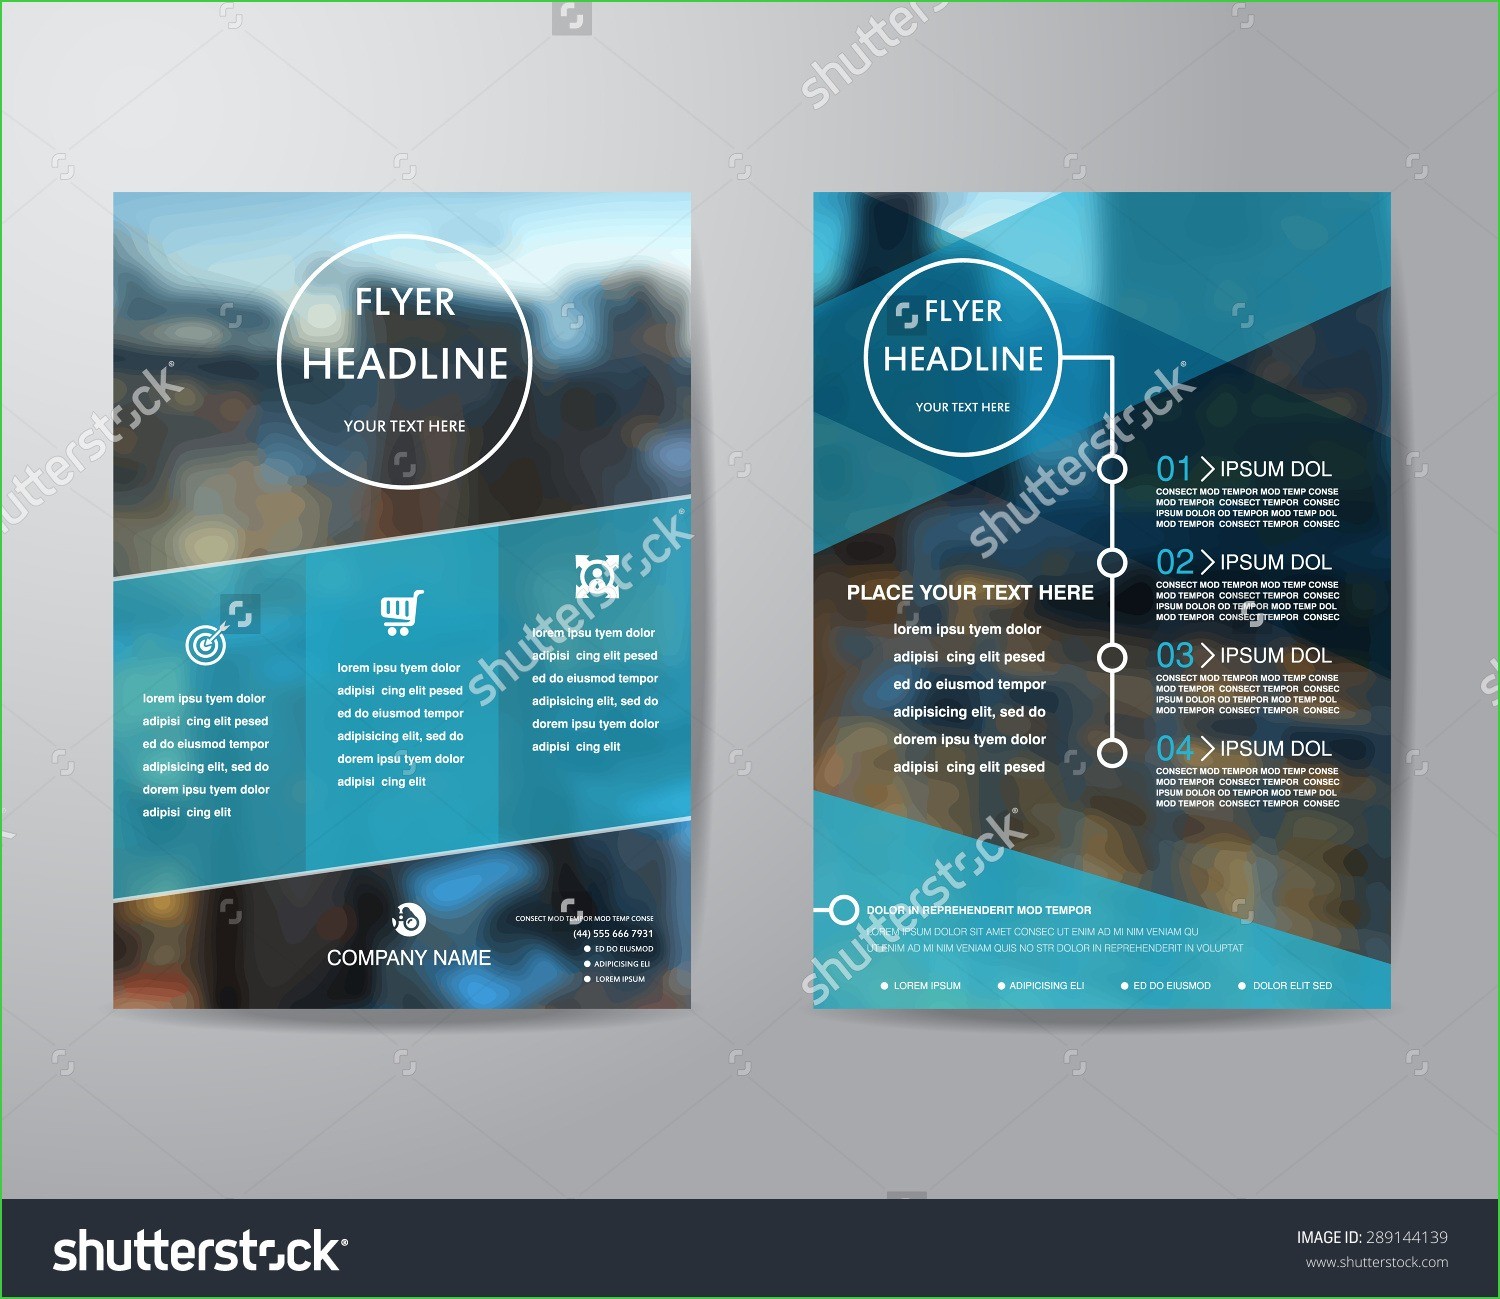 Conference Brochure Templates Church Free New 41